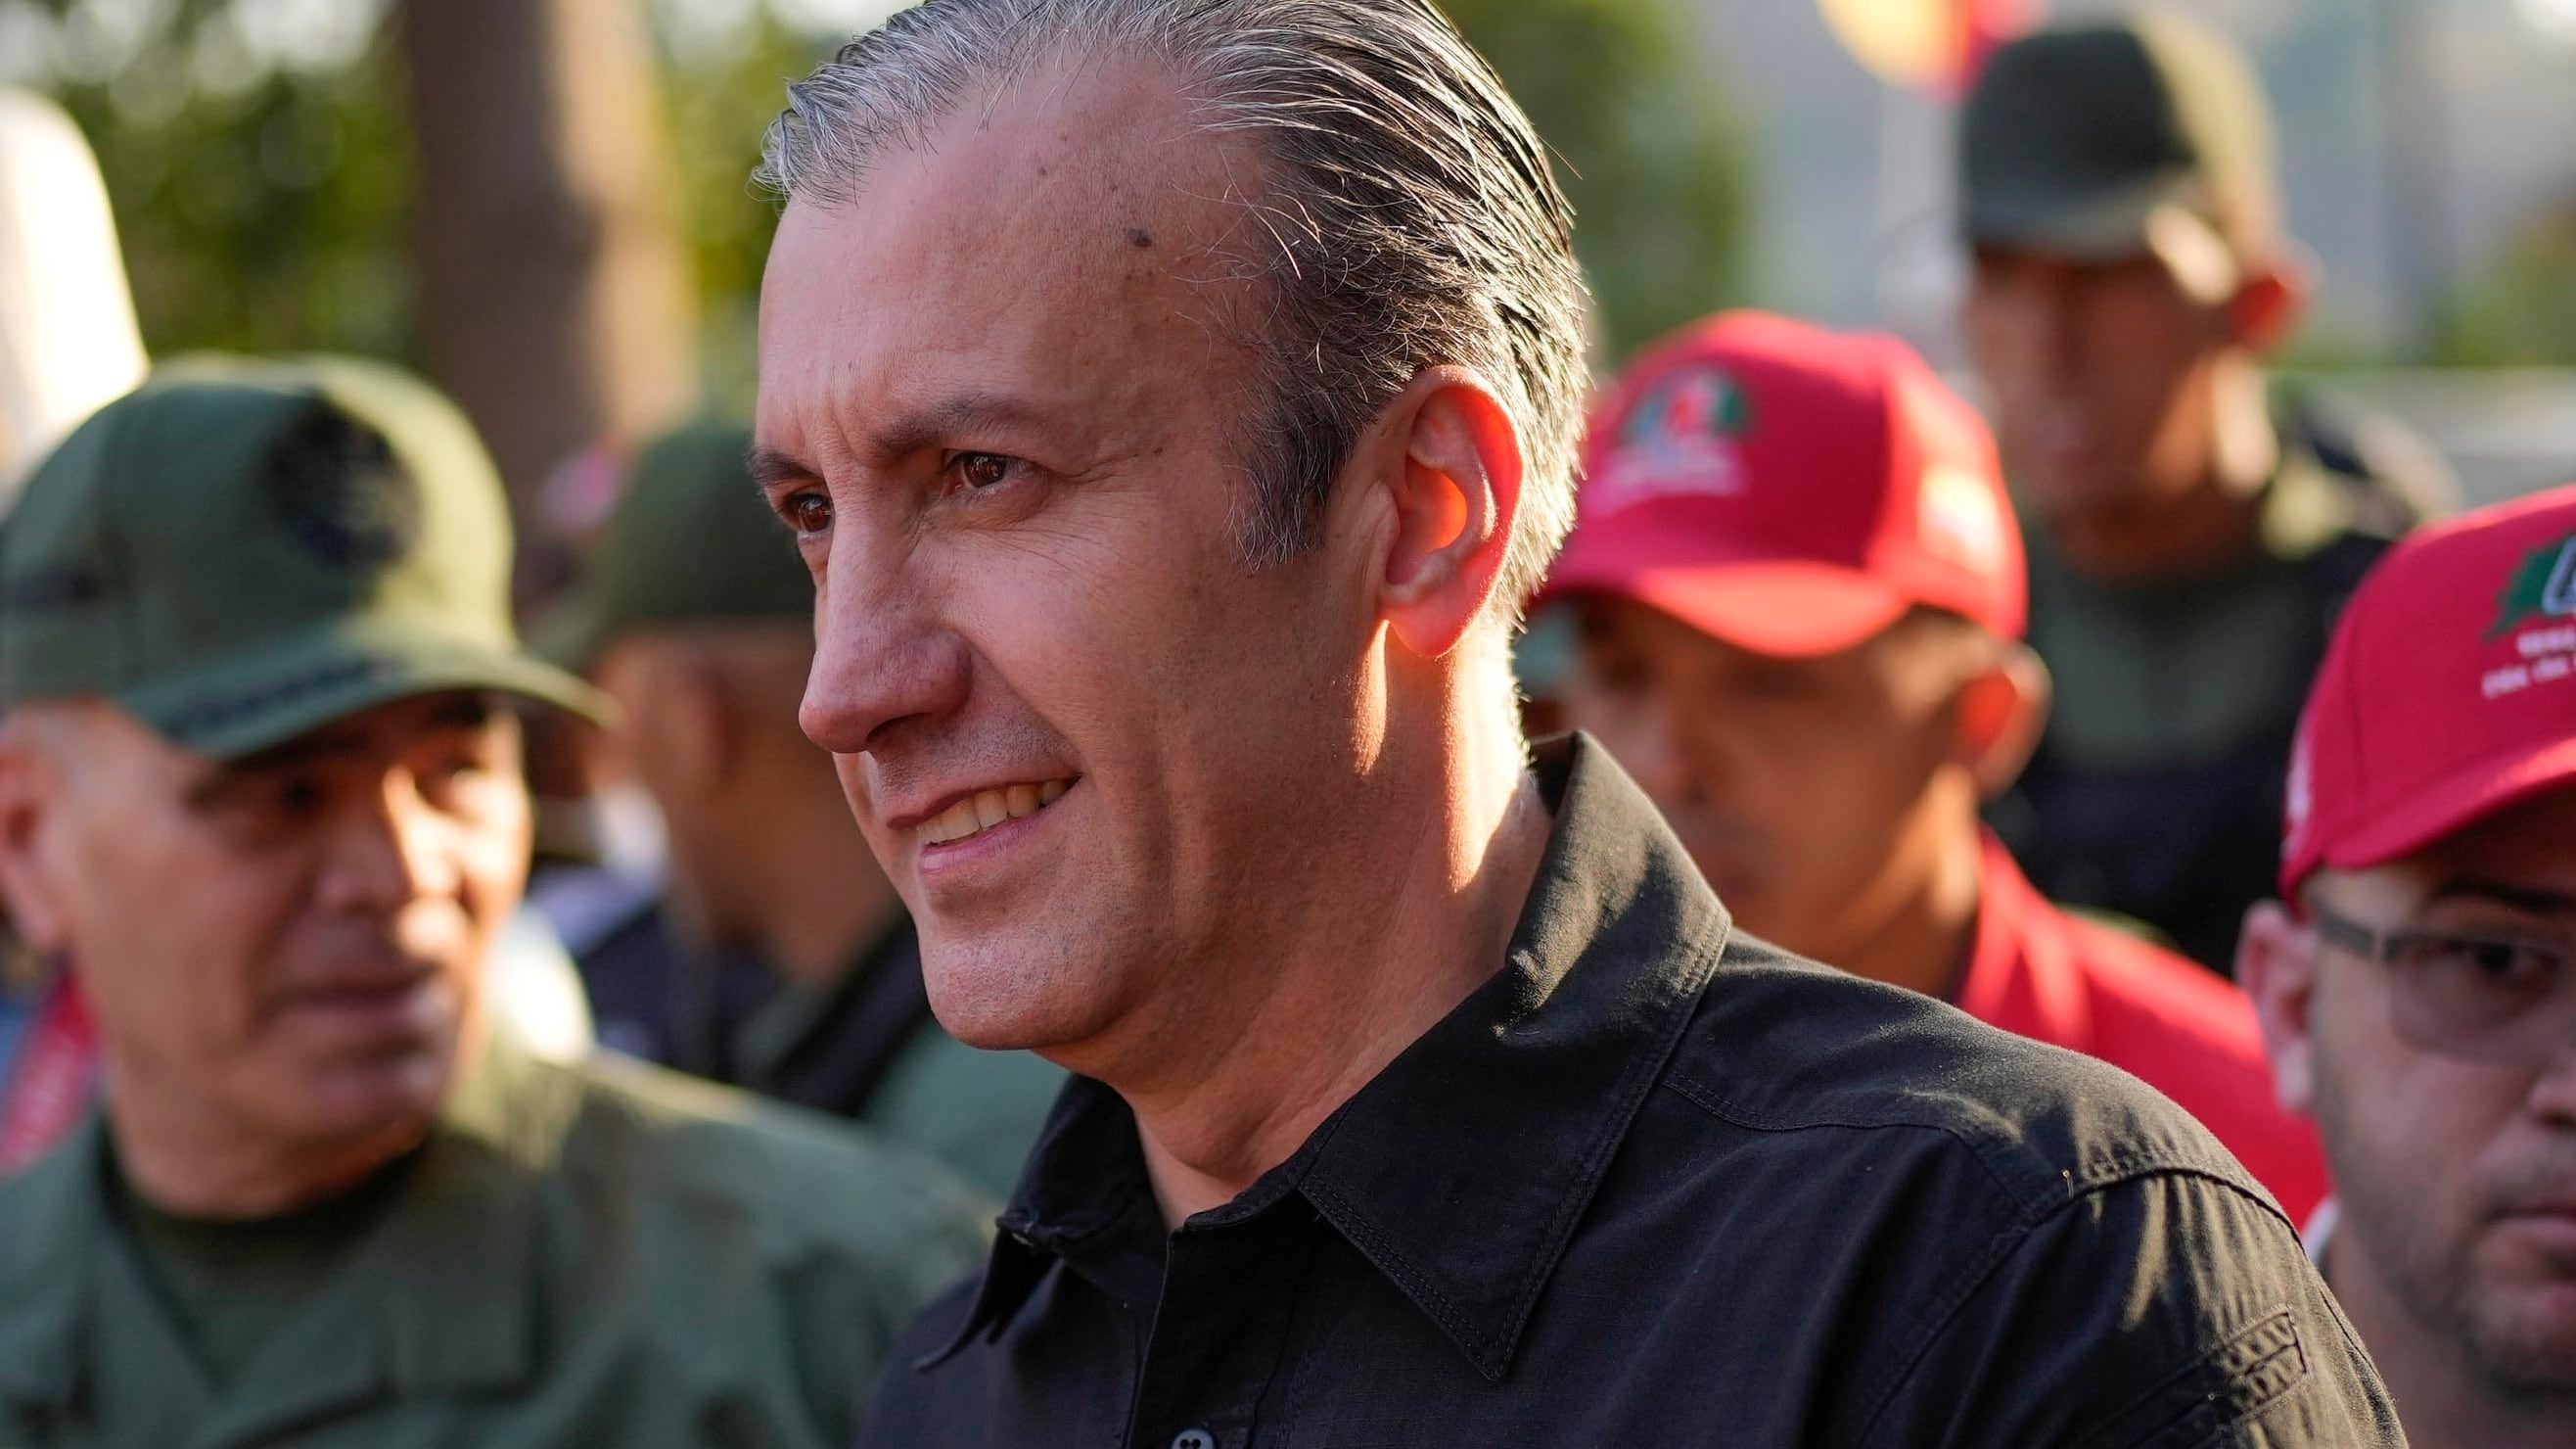 Tareck El Aissami was expected to appear in court on Tuesday (Matias Delacroix/AP)